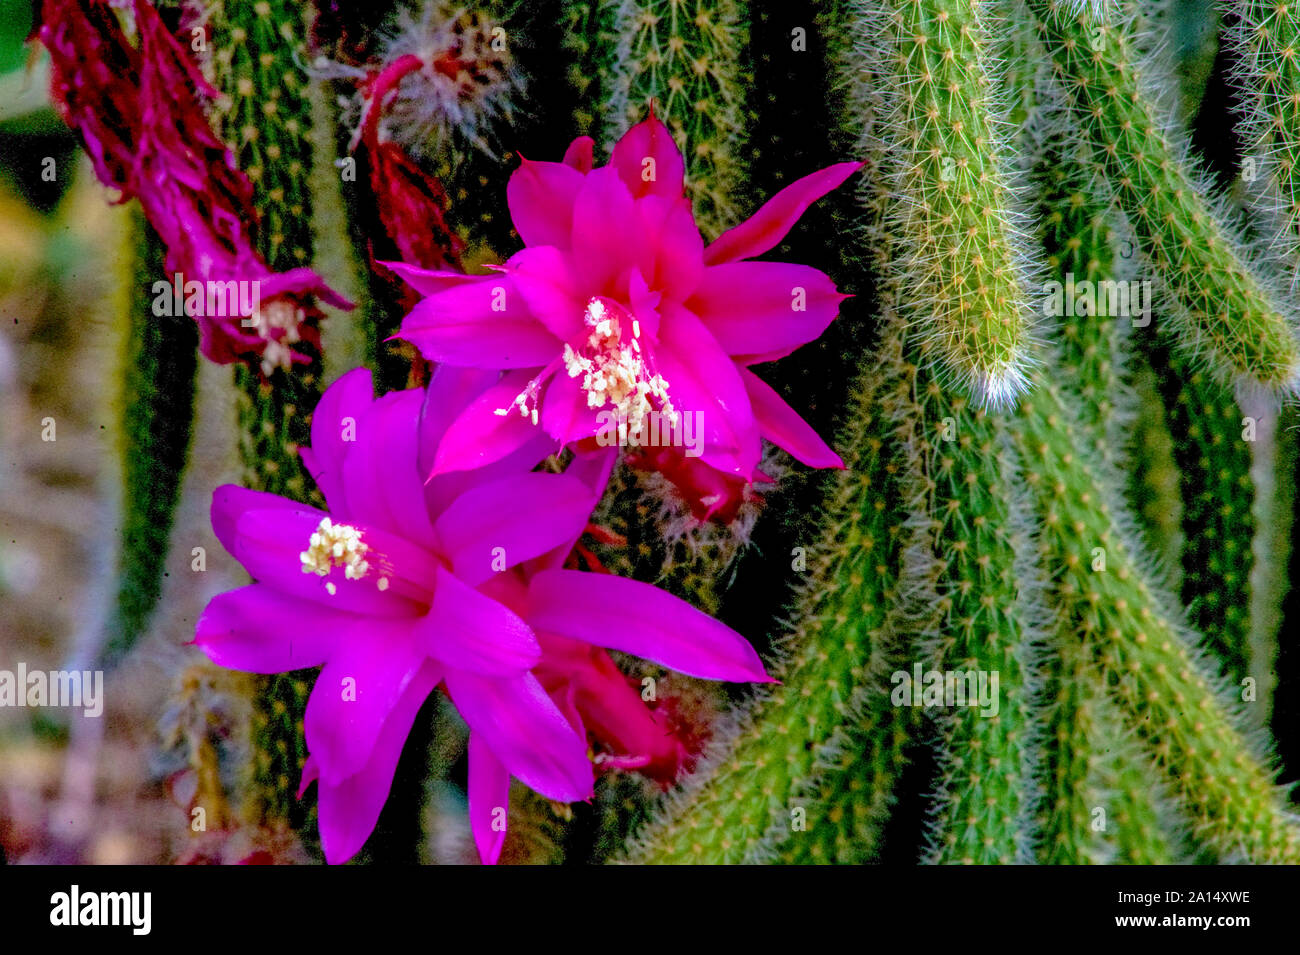 Cactii,Disocactus,flgelliformis,originated,in,Mexico,slender,cylindrical,creeping,or,pendent stems, presently,cultivated,in,Kalimpong,West Bengal,Indi Stock Photo